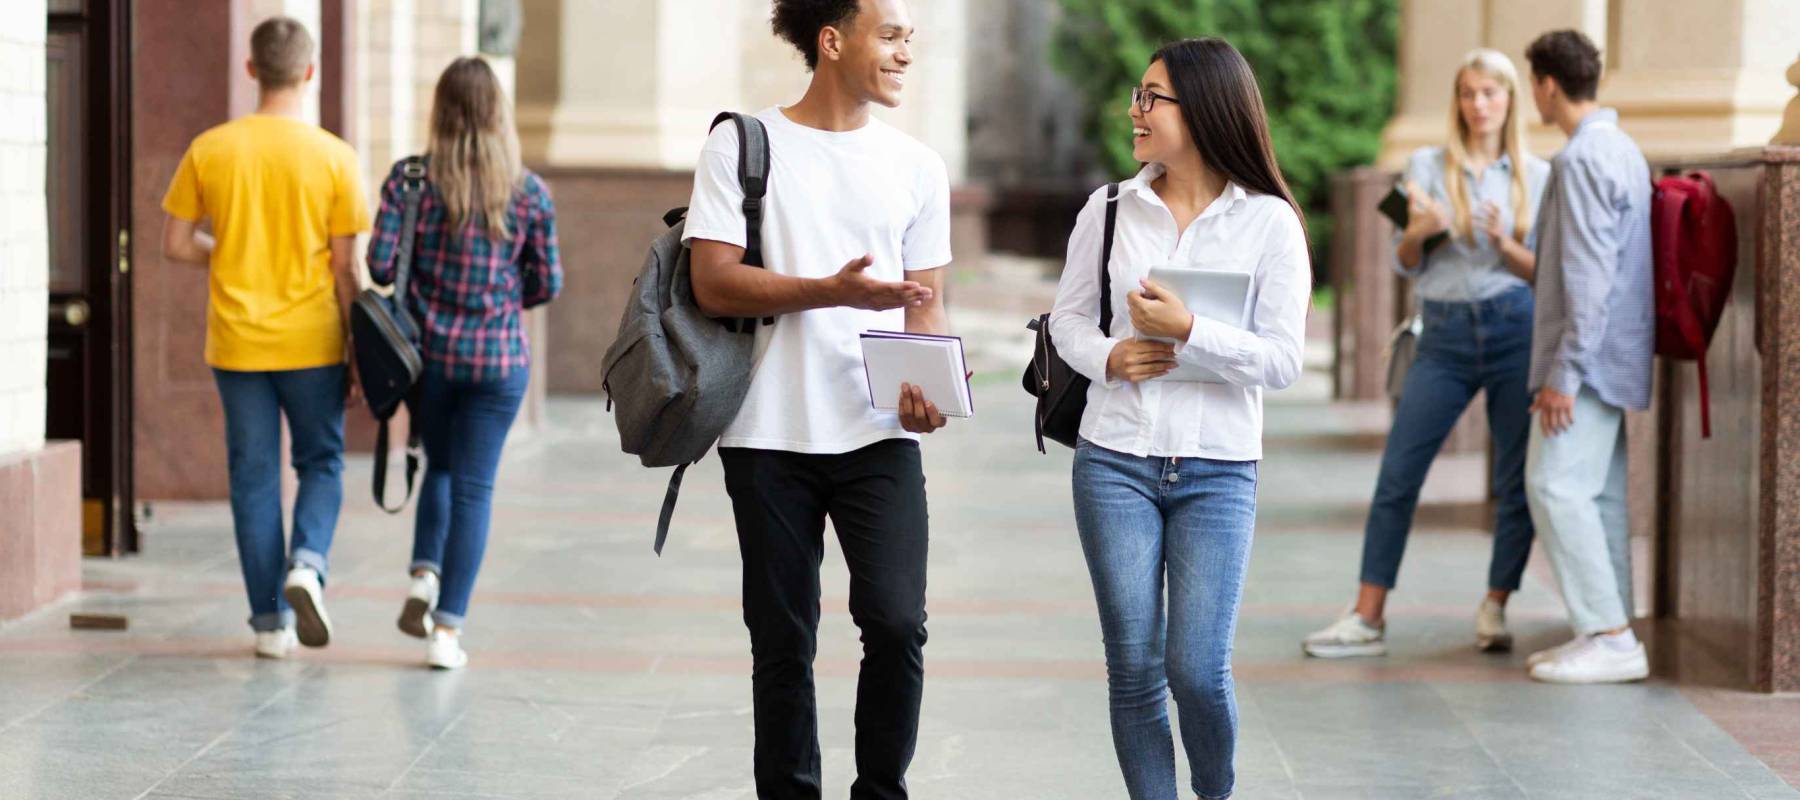 Diverse classmates chatting, walking after classes in university campus outdoors